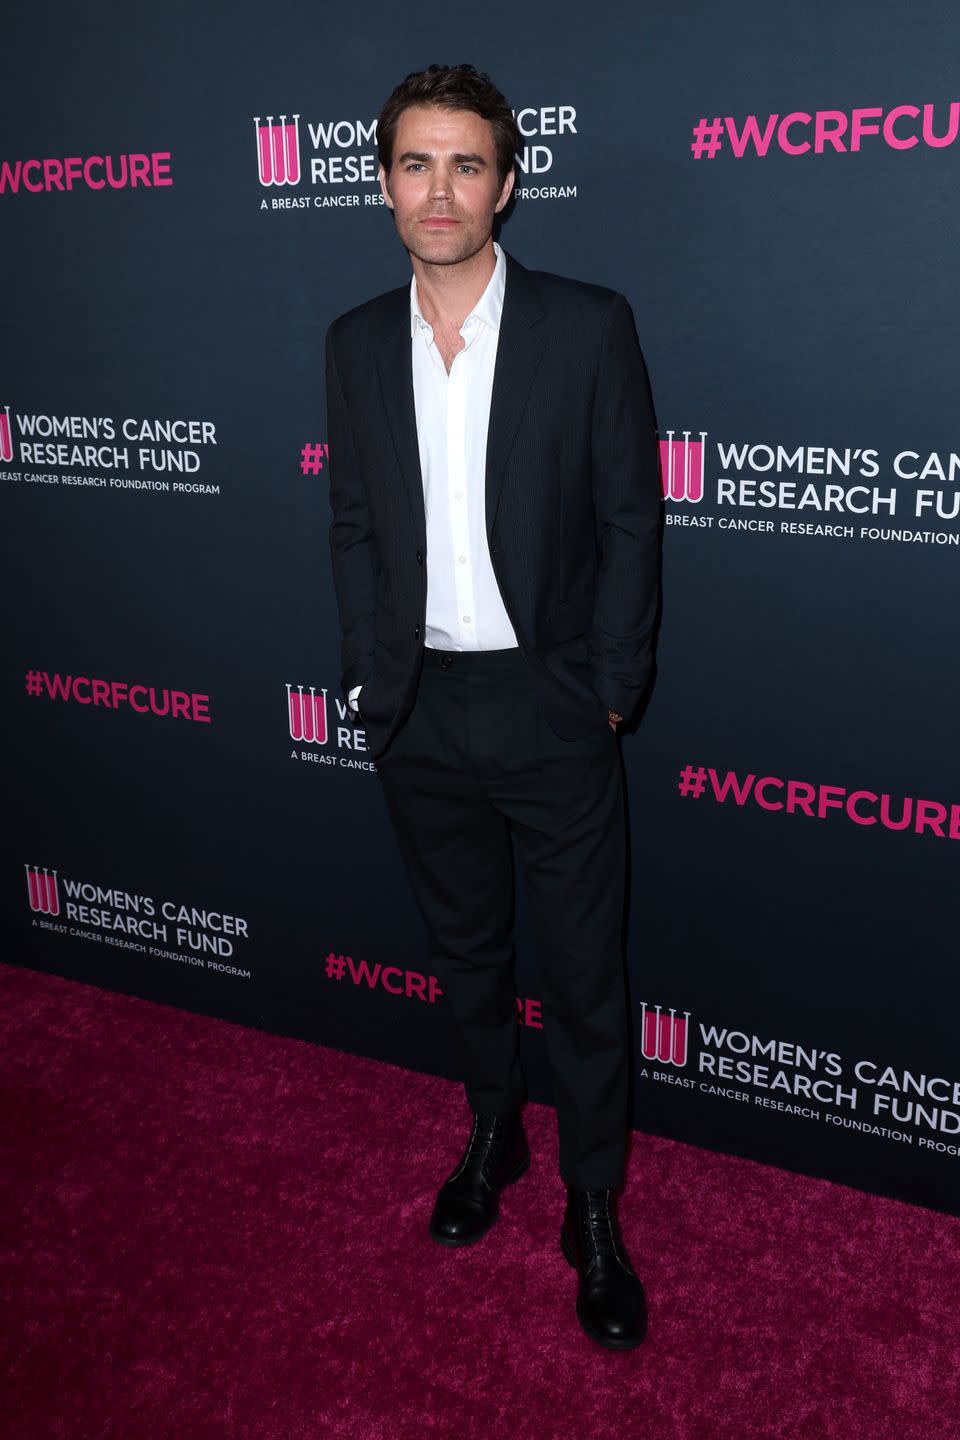 paul wesley attends an event in beverly hills, california